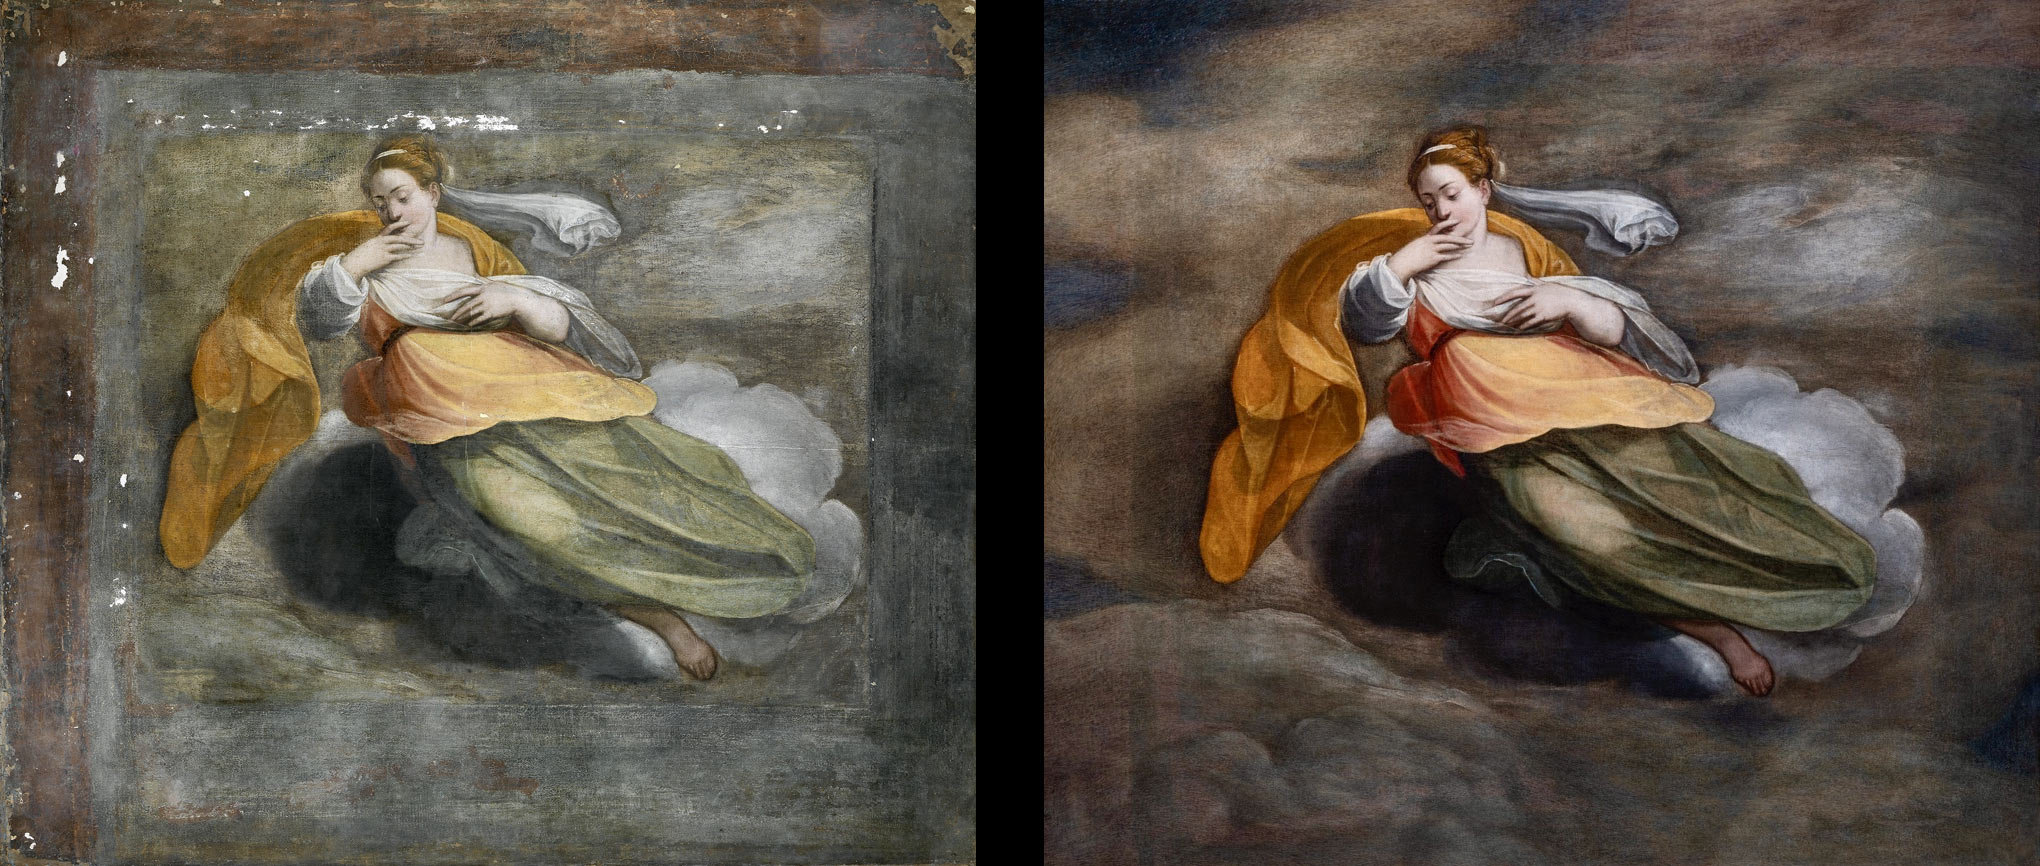 Uffizi, for the first time a 16th-century painting restored with essential oils